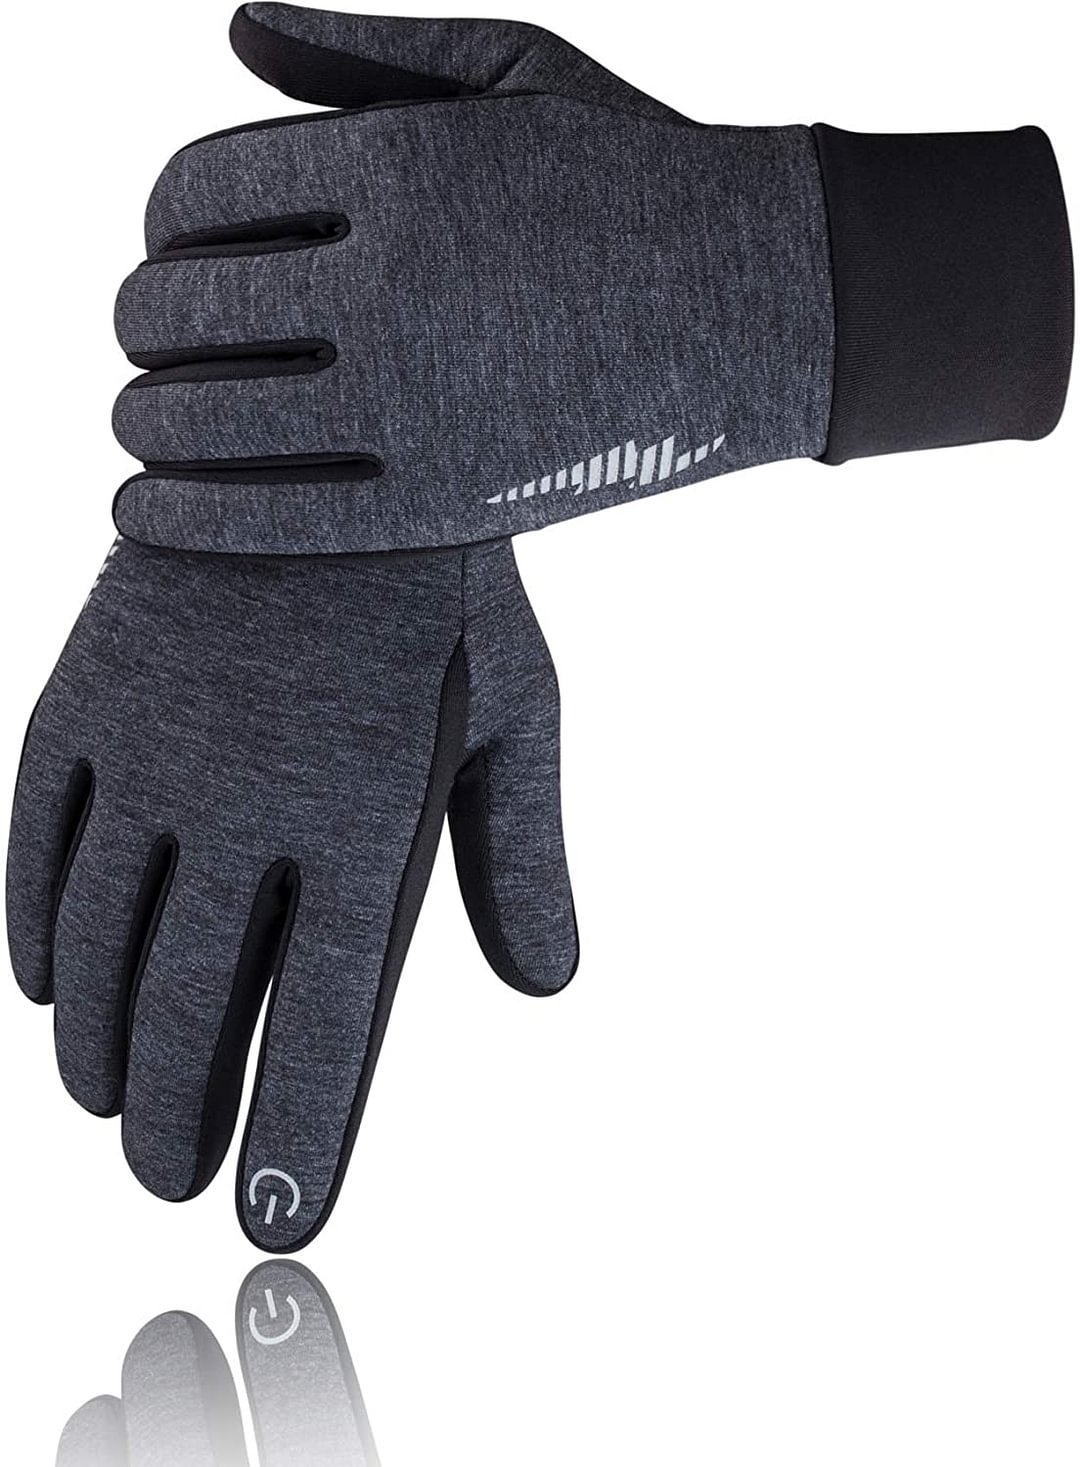 Winter Gloves Men Women Touchscreen Running Gloves Cold Weather Warm Gloves Driving Cycling Texting Workout Training